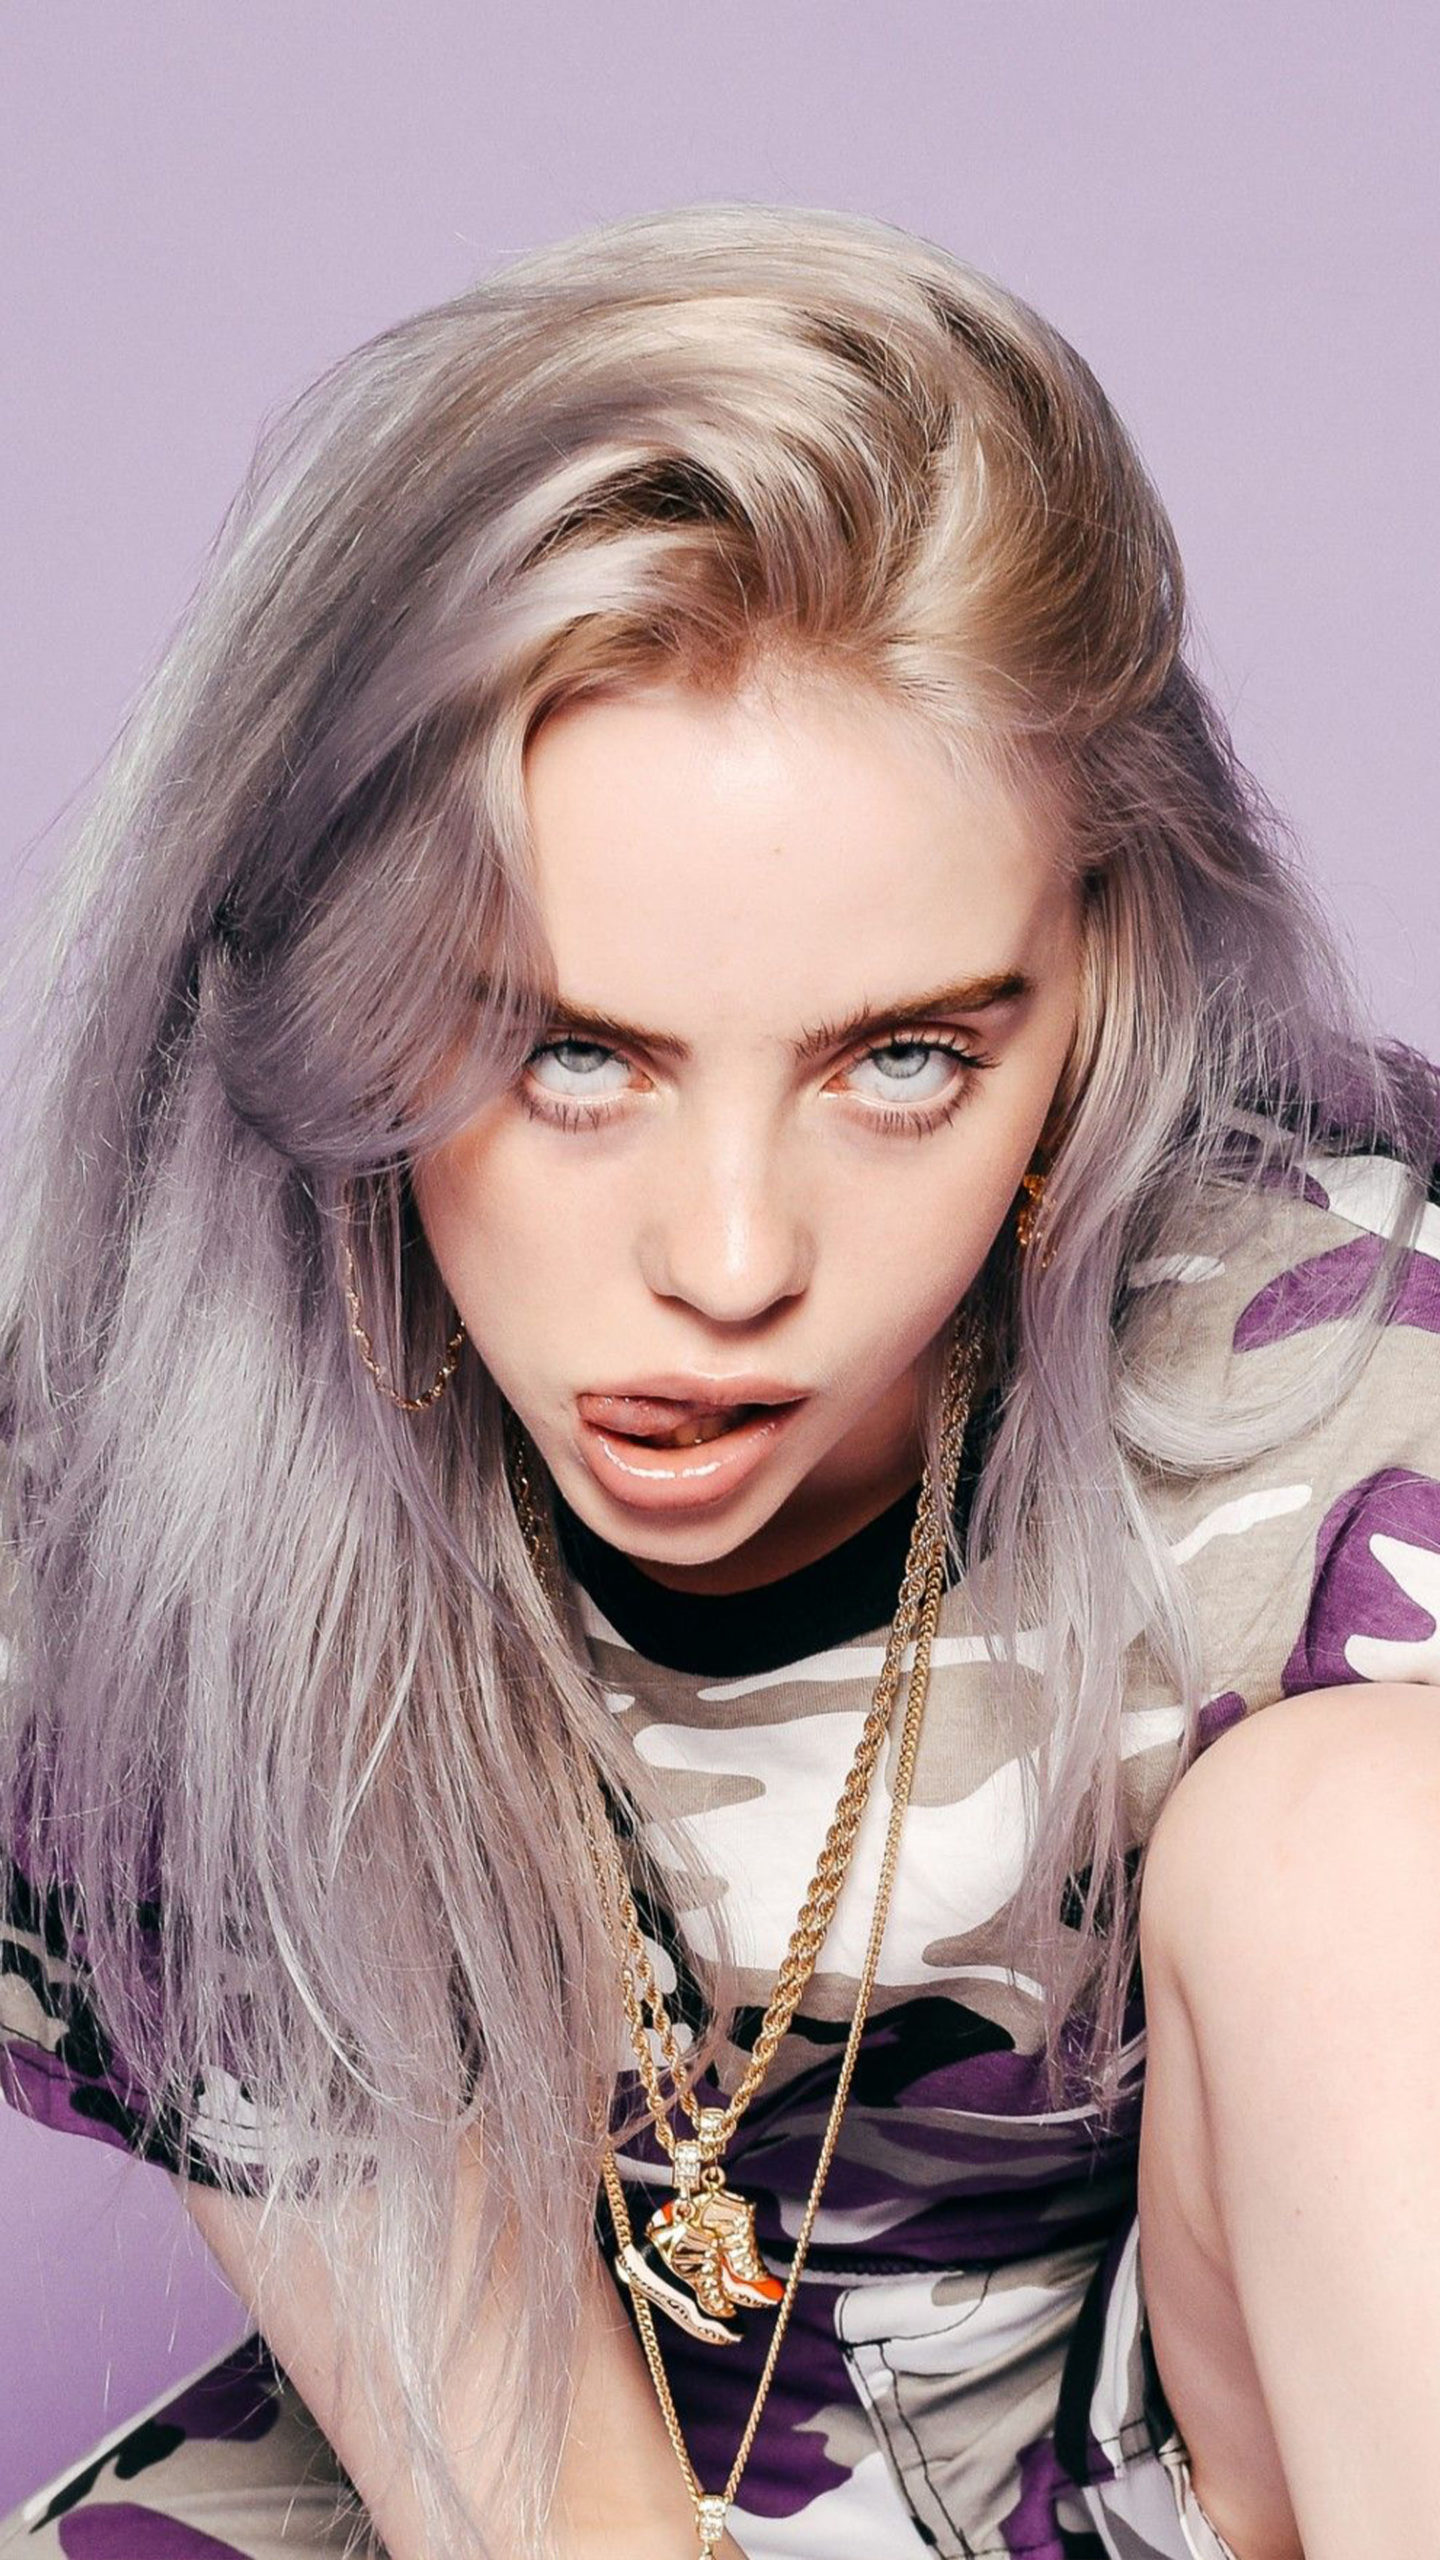 Billie Eilish The Guardian Weekend Magazine 2021 HD Music 4k Wallpapers  Images Backgrounds Photos and Pictures